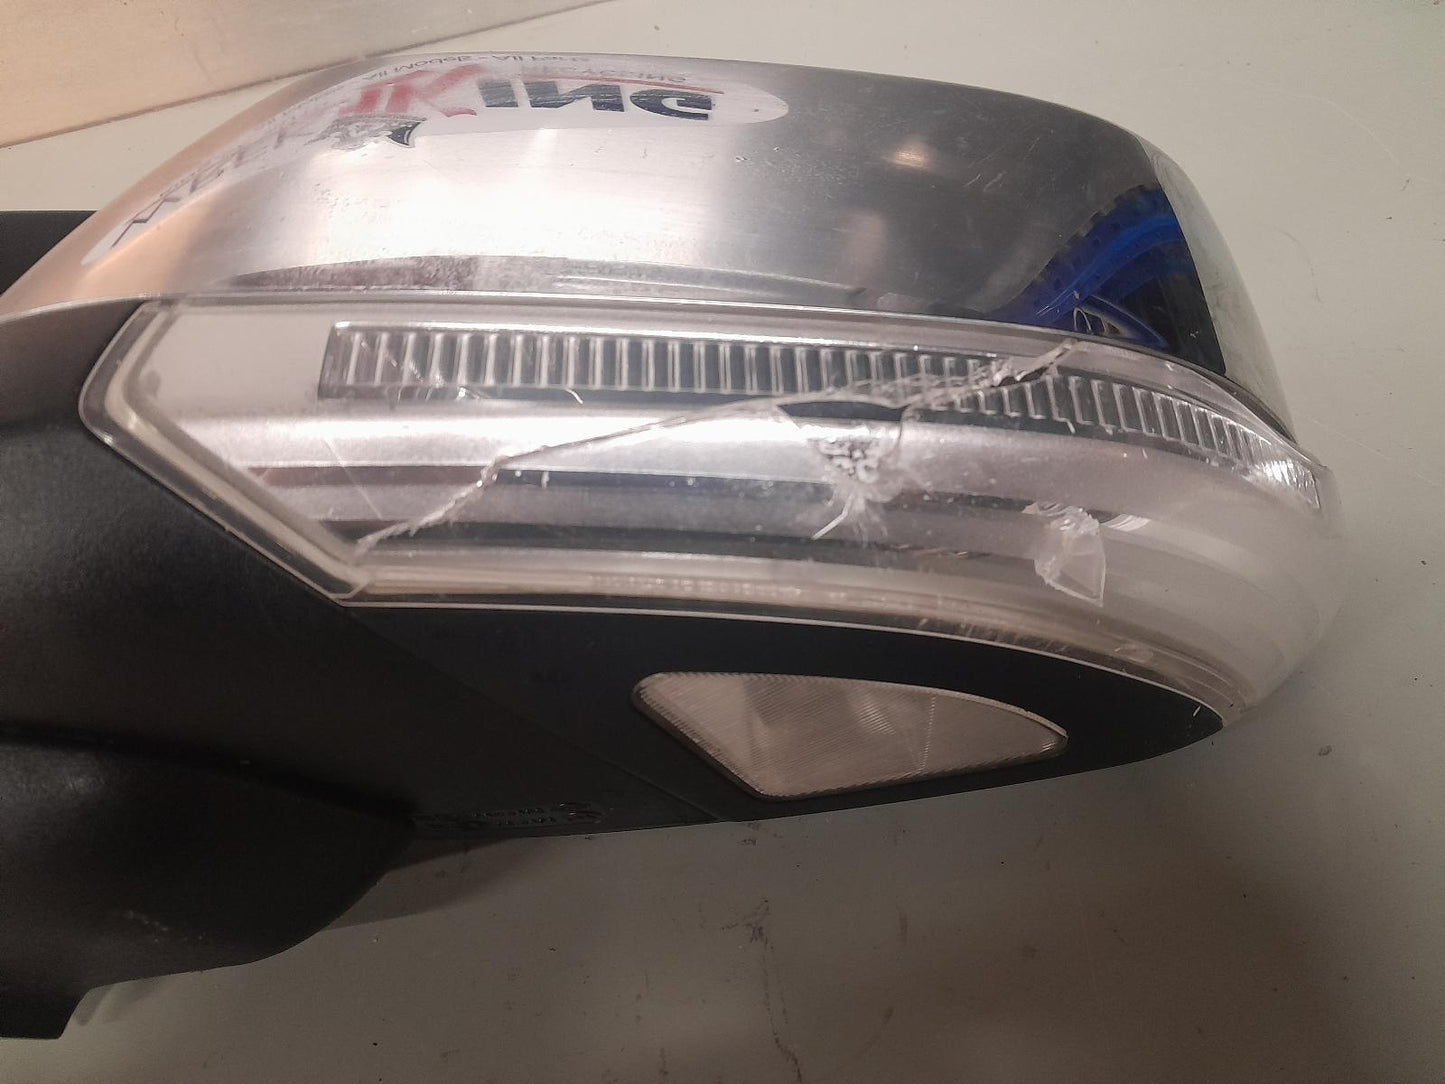 NISSAN PATHFINDER LEFT DOOR MIRROR R51, ST-L, CHROME, W/ INDICATOR, MANUAL FOLD, NON HEATED NON MEMORY TYPE, 05/07-04/10